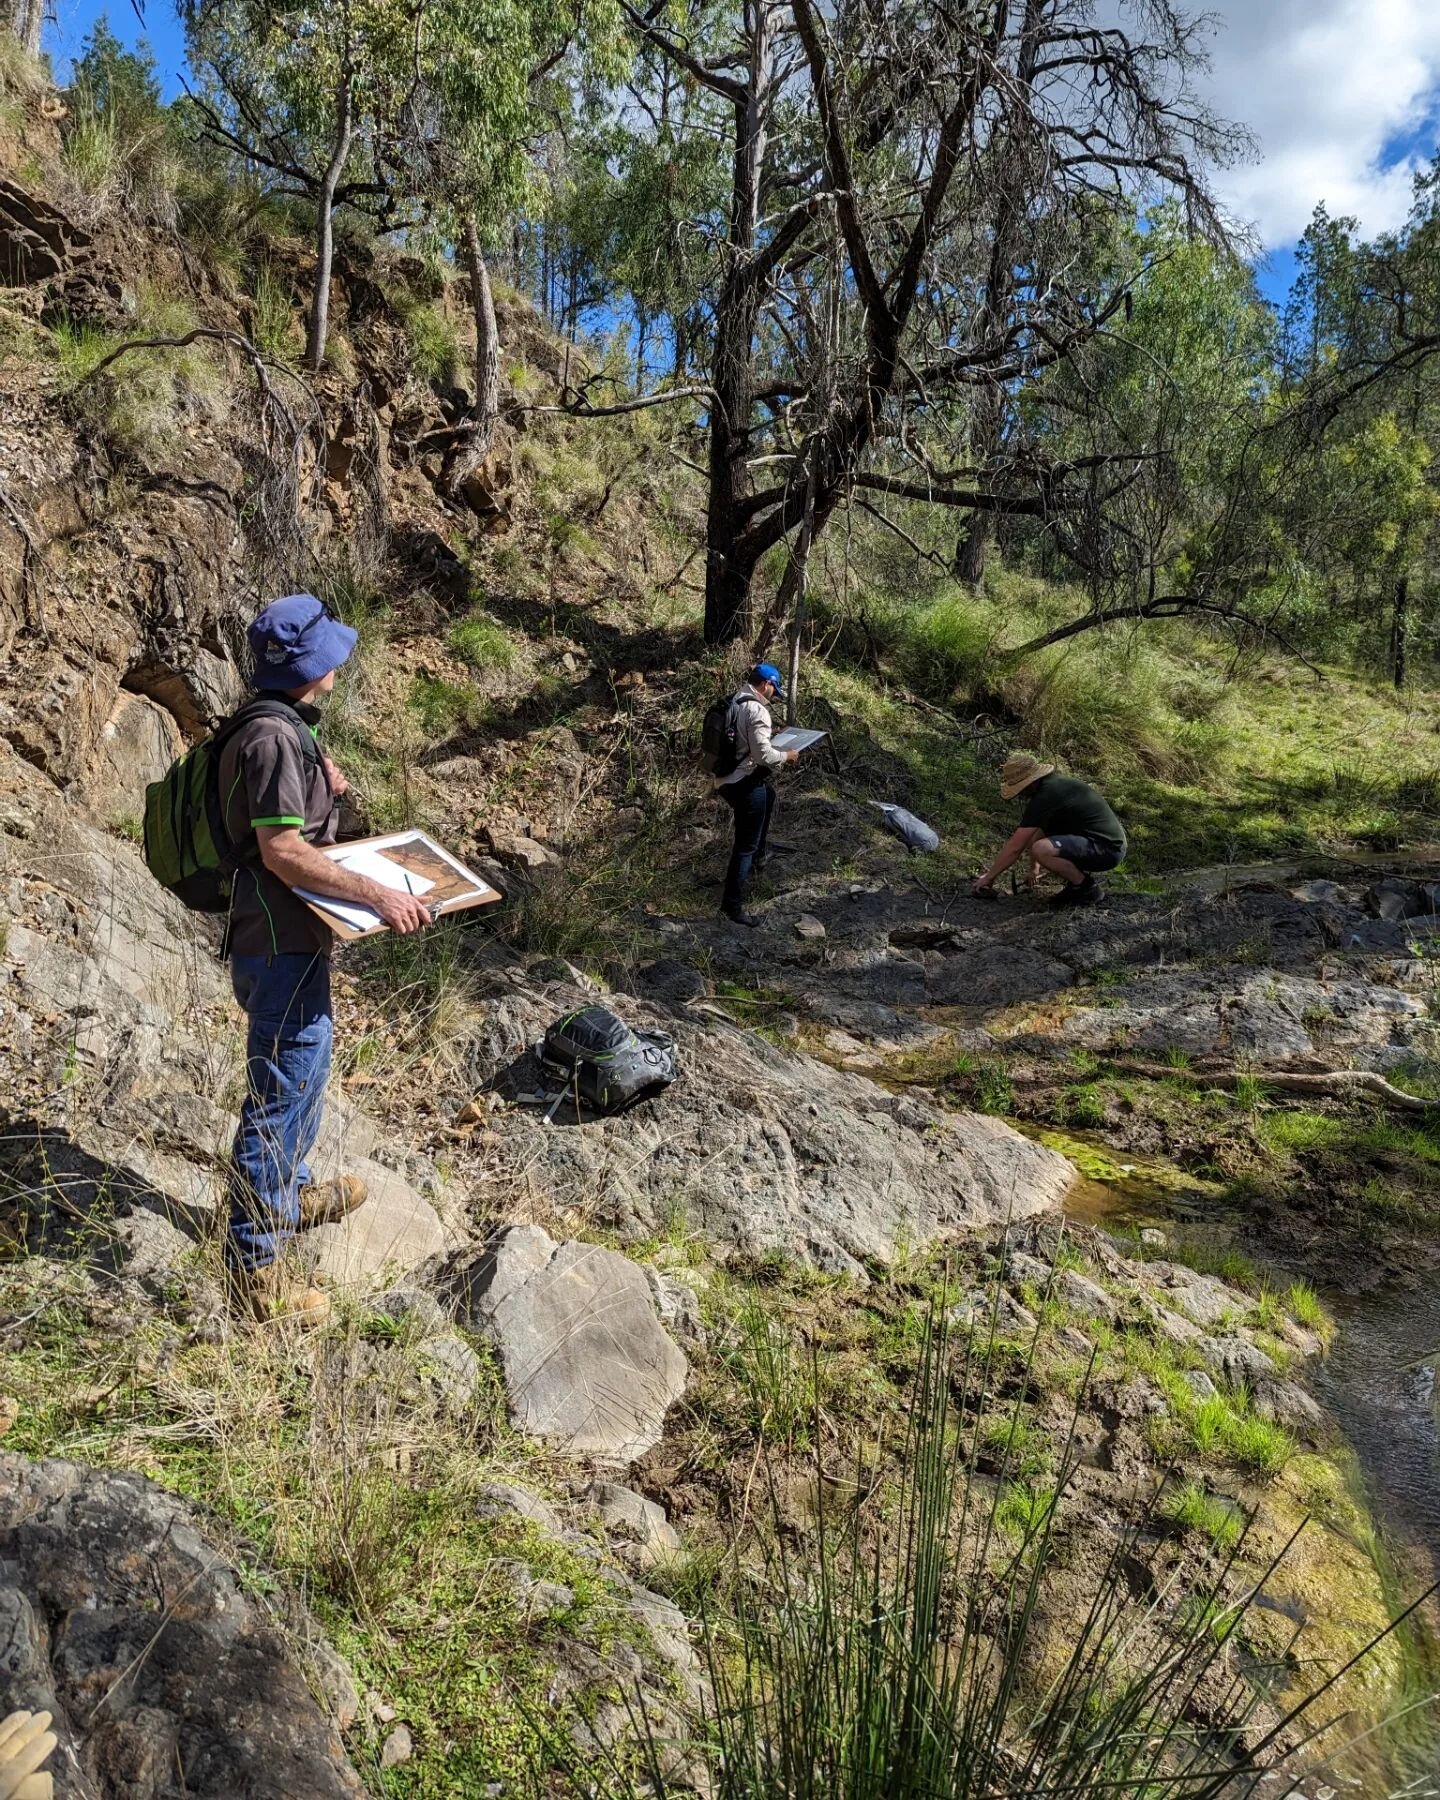 GEOL206 trip to Lake Keepit! First geological mapping exercise... Love watching it all come together for the students! 😎⛏️🪨🧭 #geoscience #geology #geologicalmapping #fieldtrip #rocks #fossils #lakekeepit #geologicalstructures